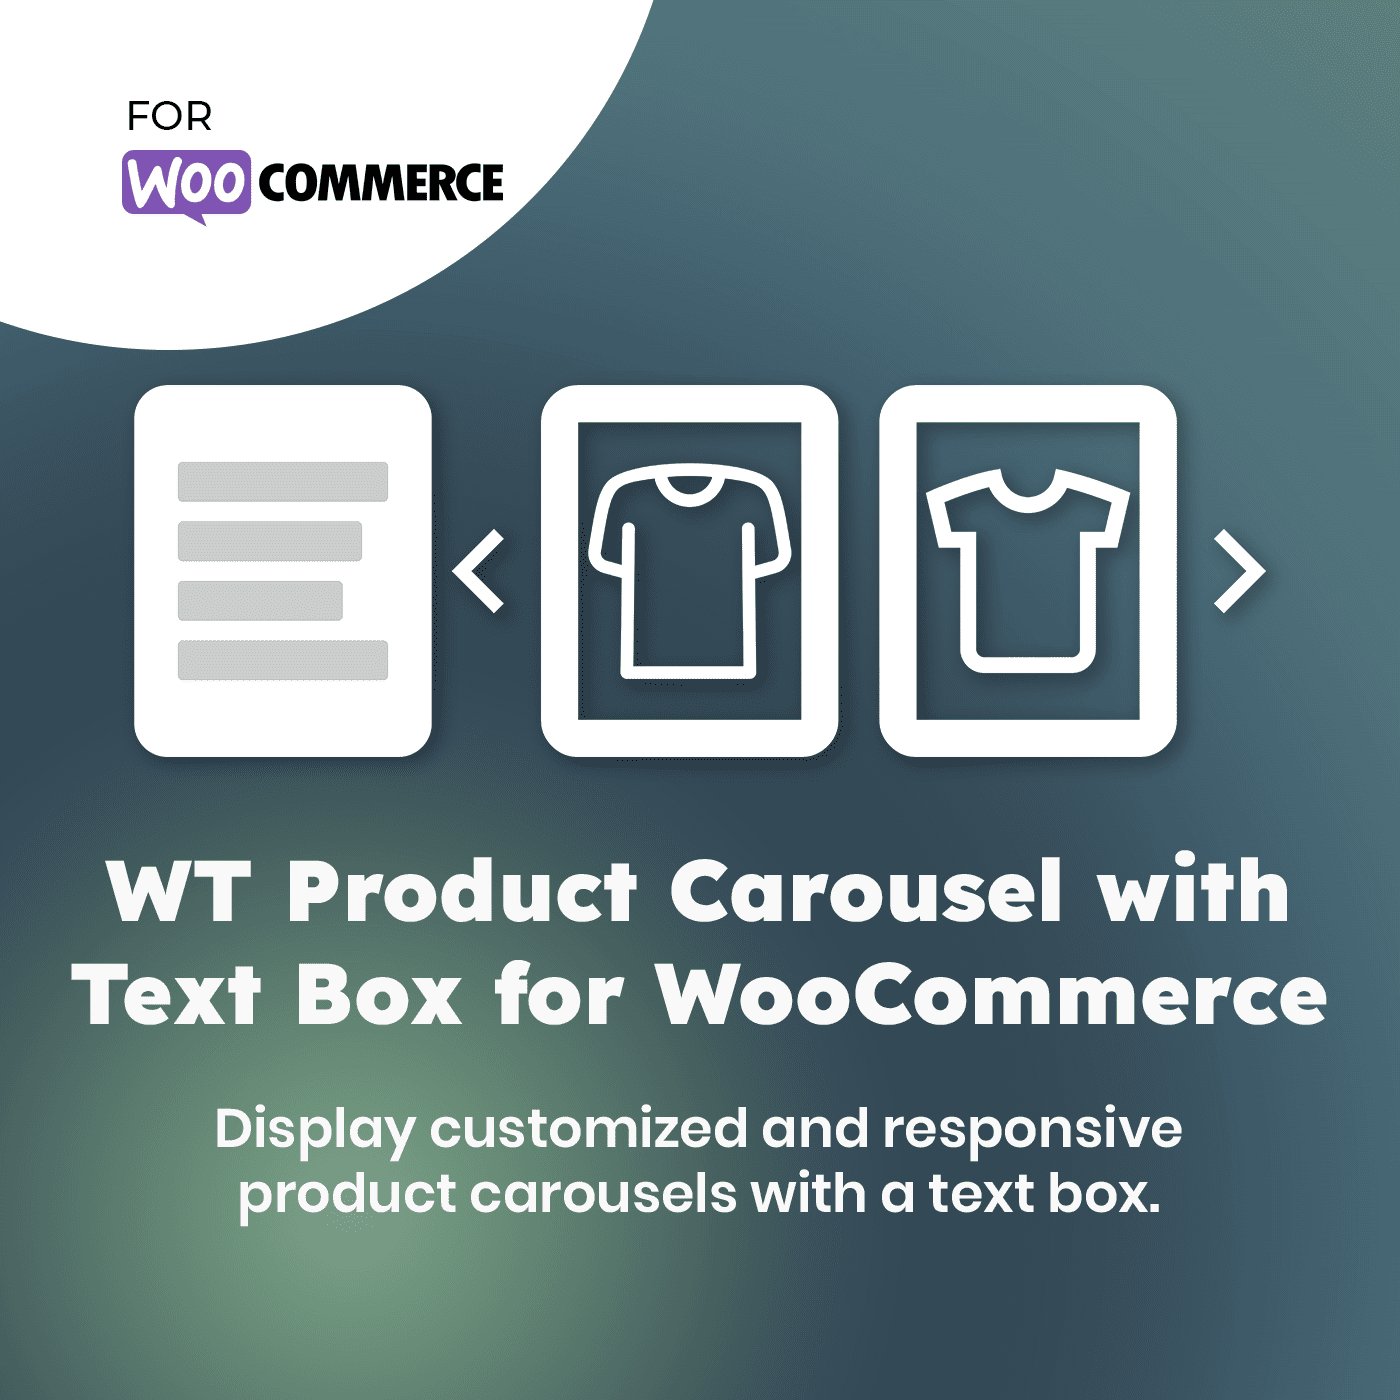 WT Product Carousel with Text Box for WooCommerce - WooCommerce Theme